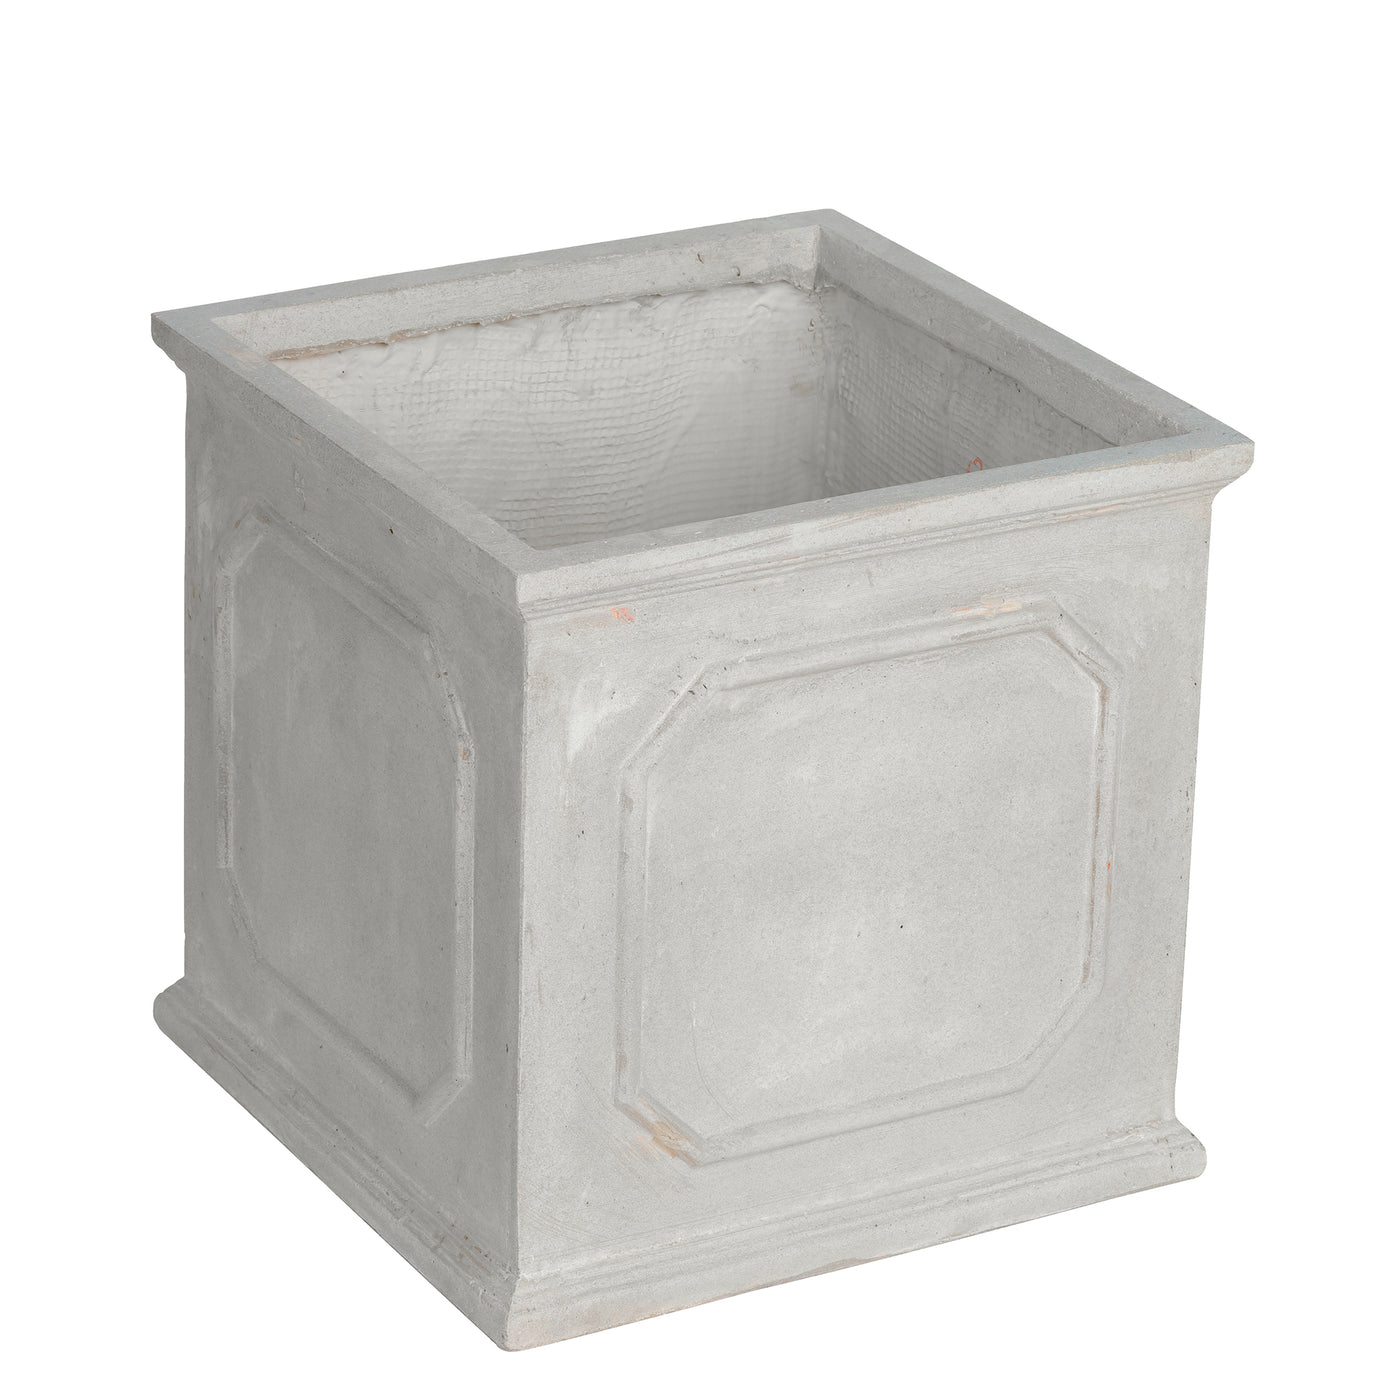 Square stonecast planter with traditional clipped corner panel in light grey